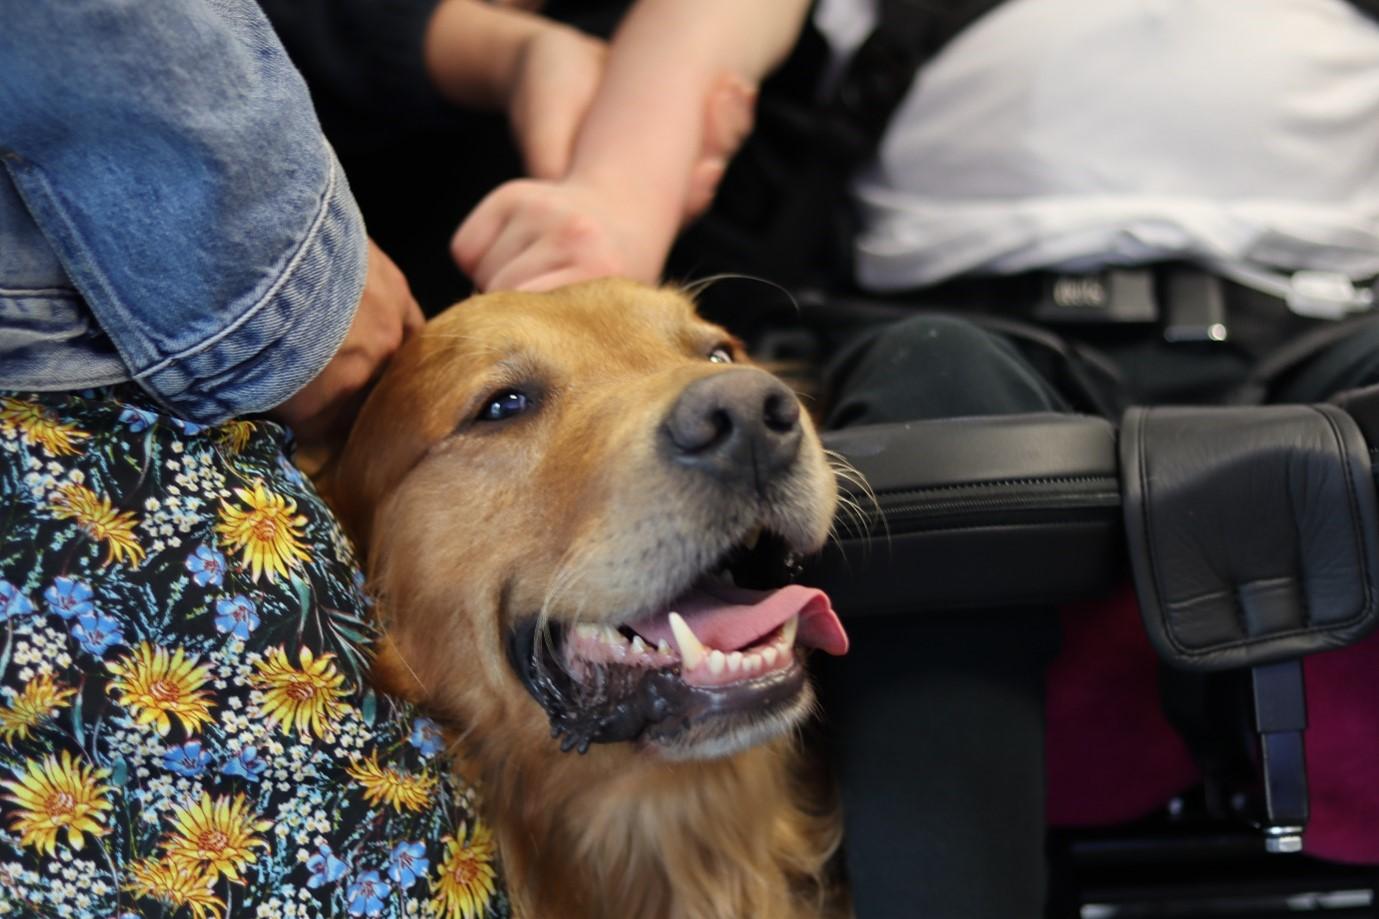 Pets As Therapy dog Mac being stroked by a child in a wheelchair